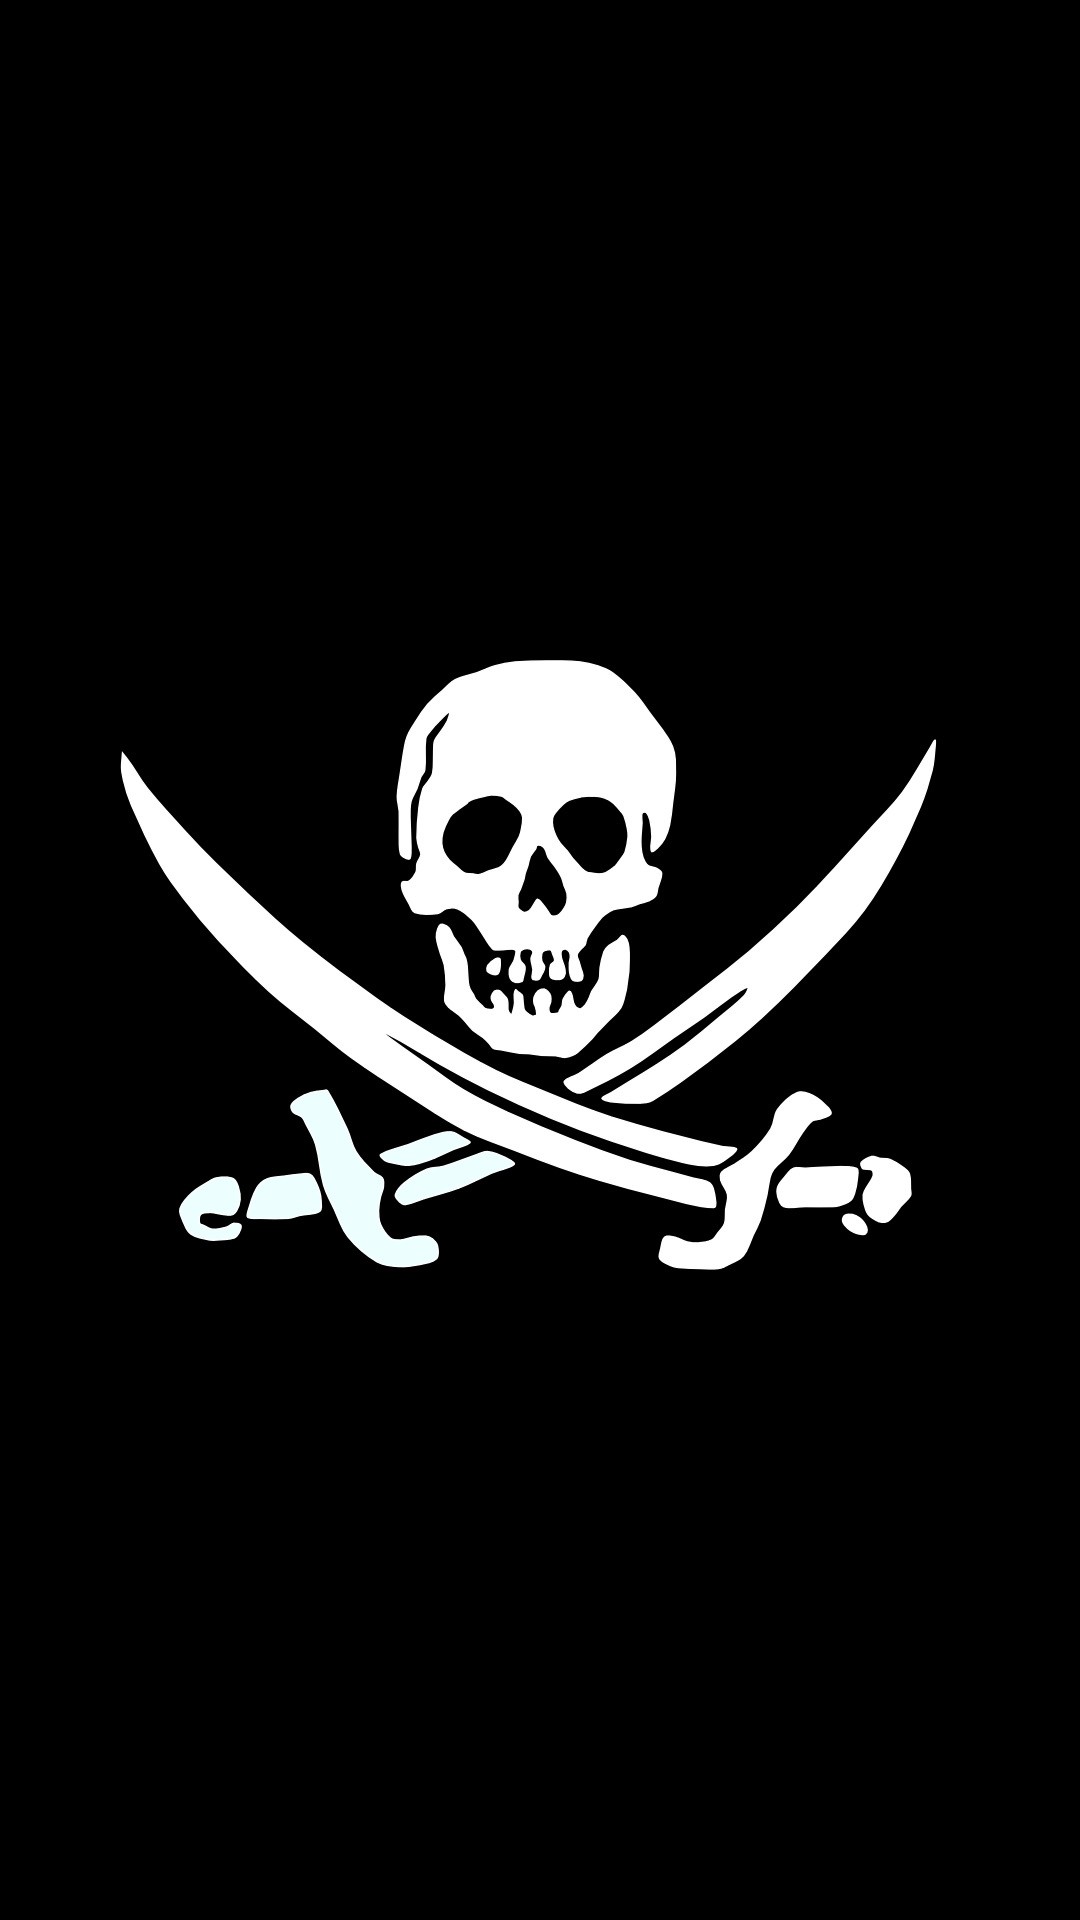 1080x1920 Jolly Roger Pirate Skull Black And White iPhone 6 iPhone 8 Plus Wallpaper